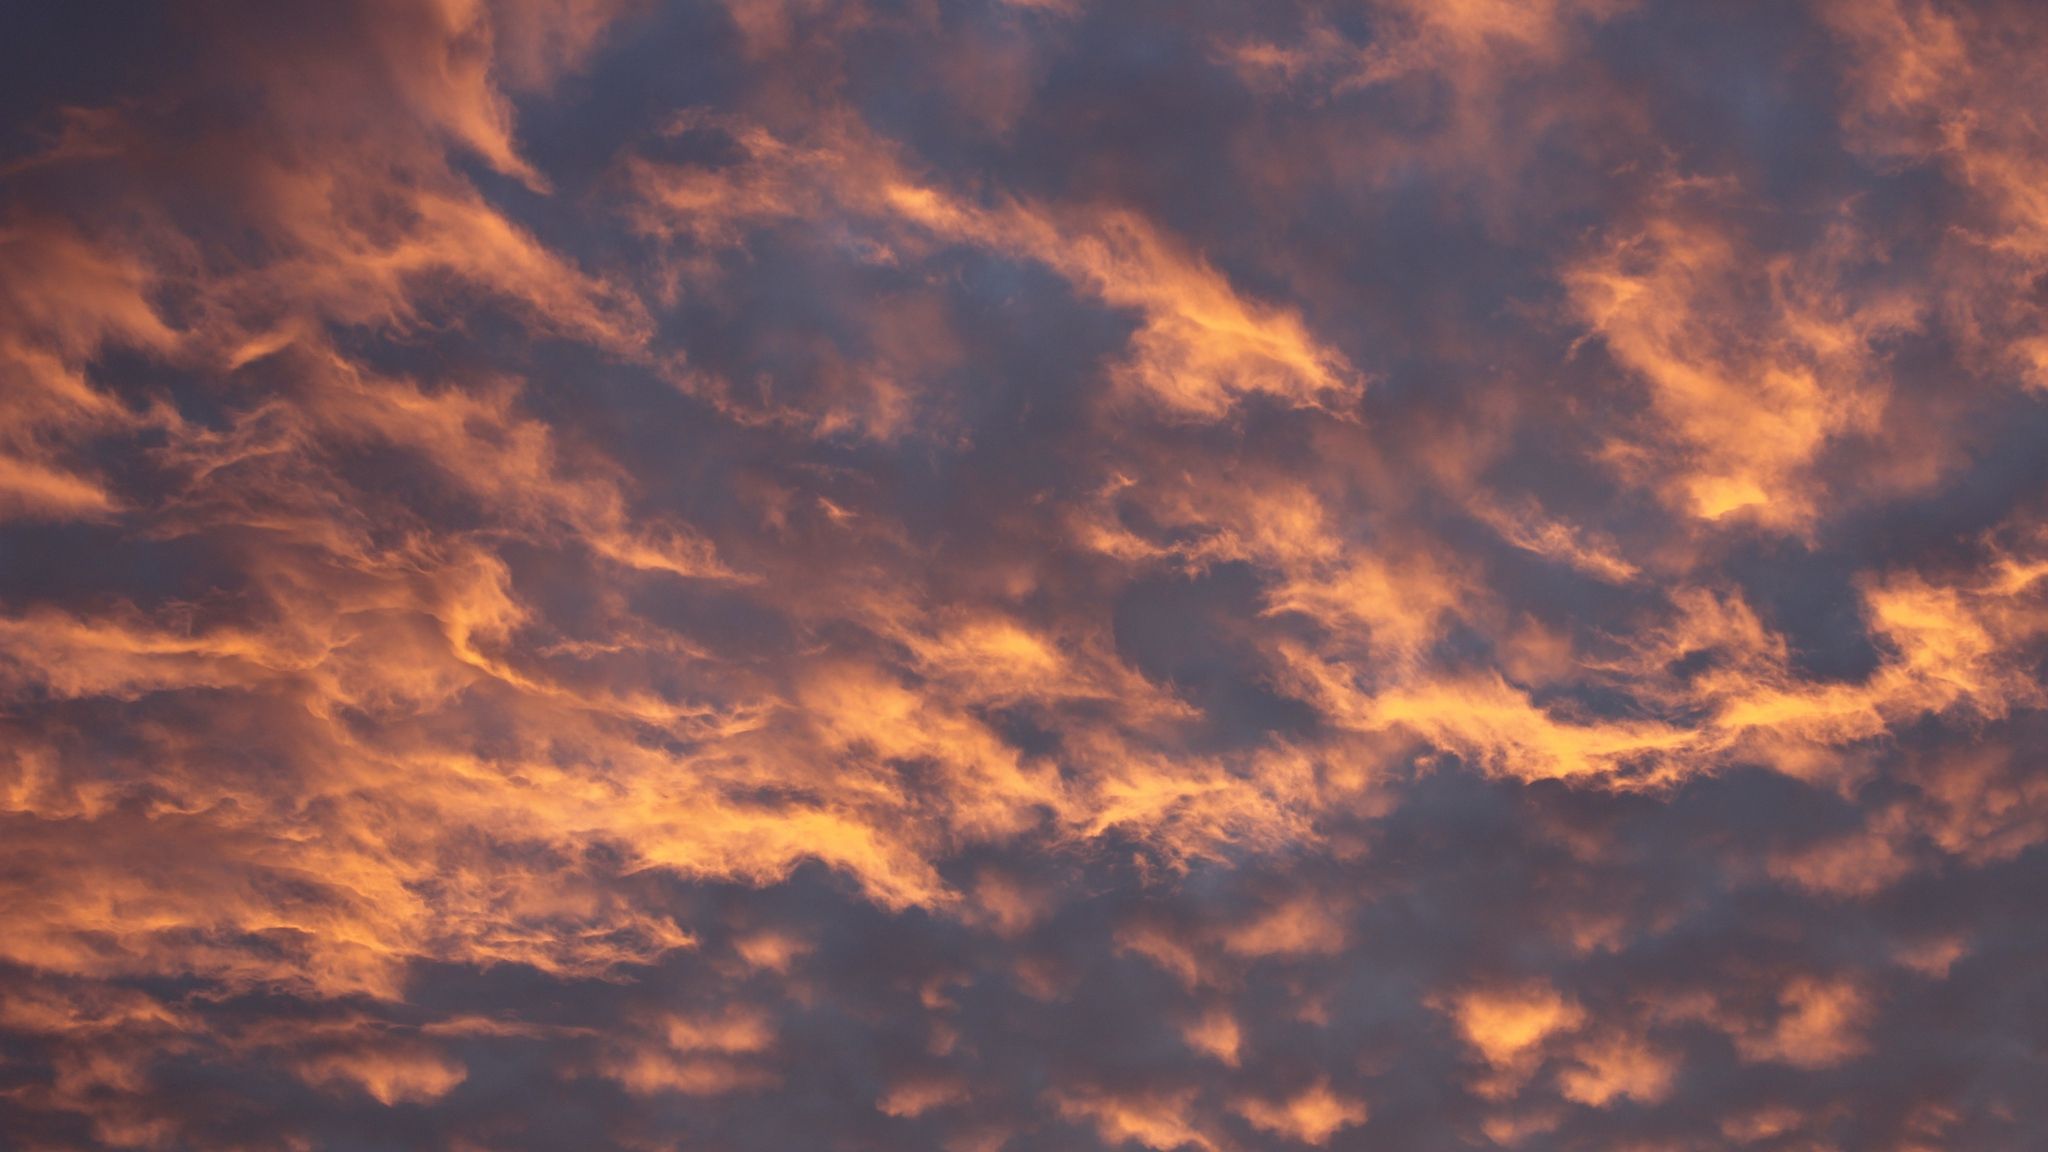 Download wallpapers 2048x1152 sky, clouds, evening, pink, yellow